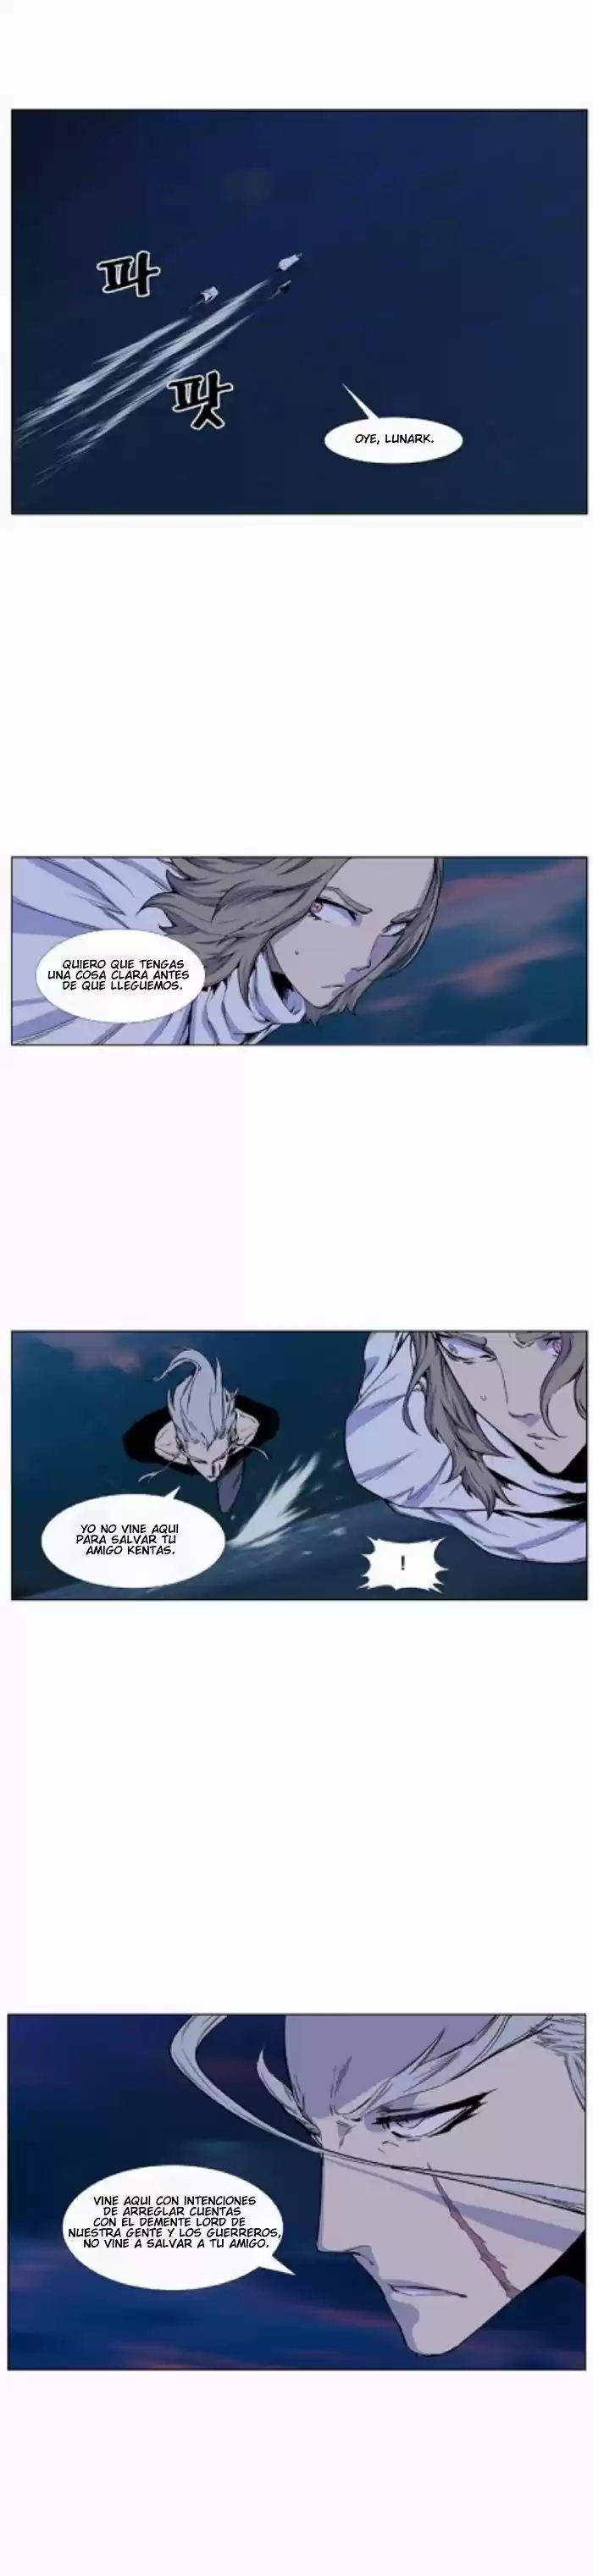 Noblesse: Chapter 424 - Page 1